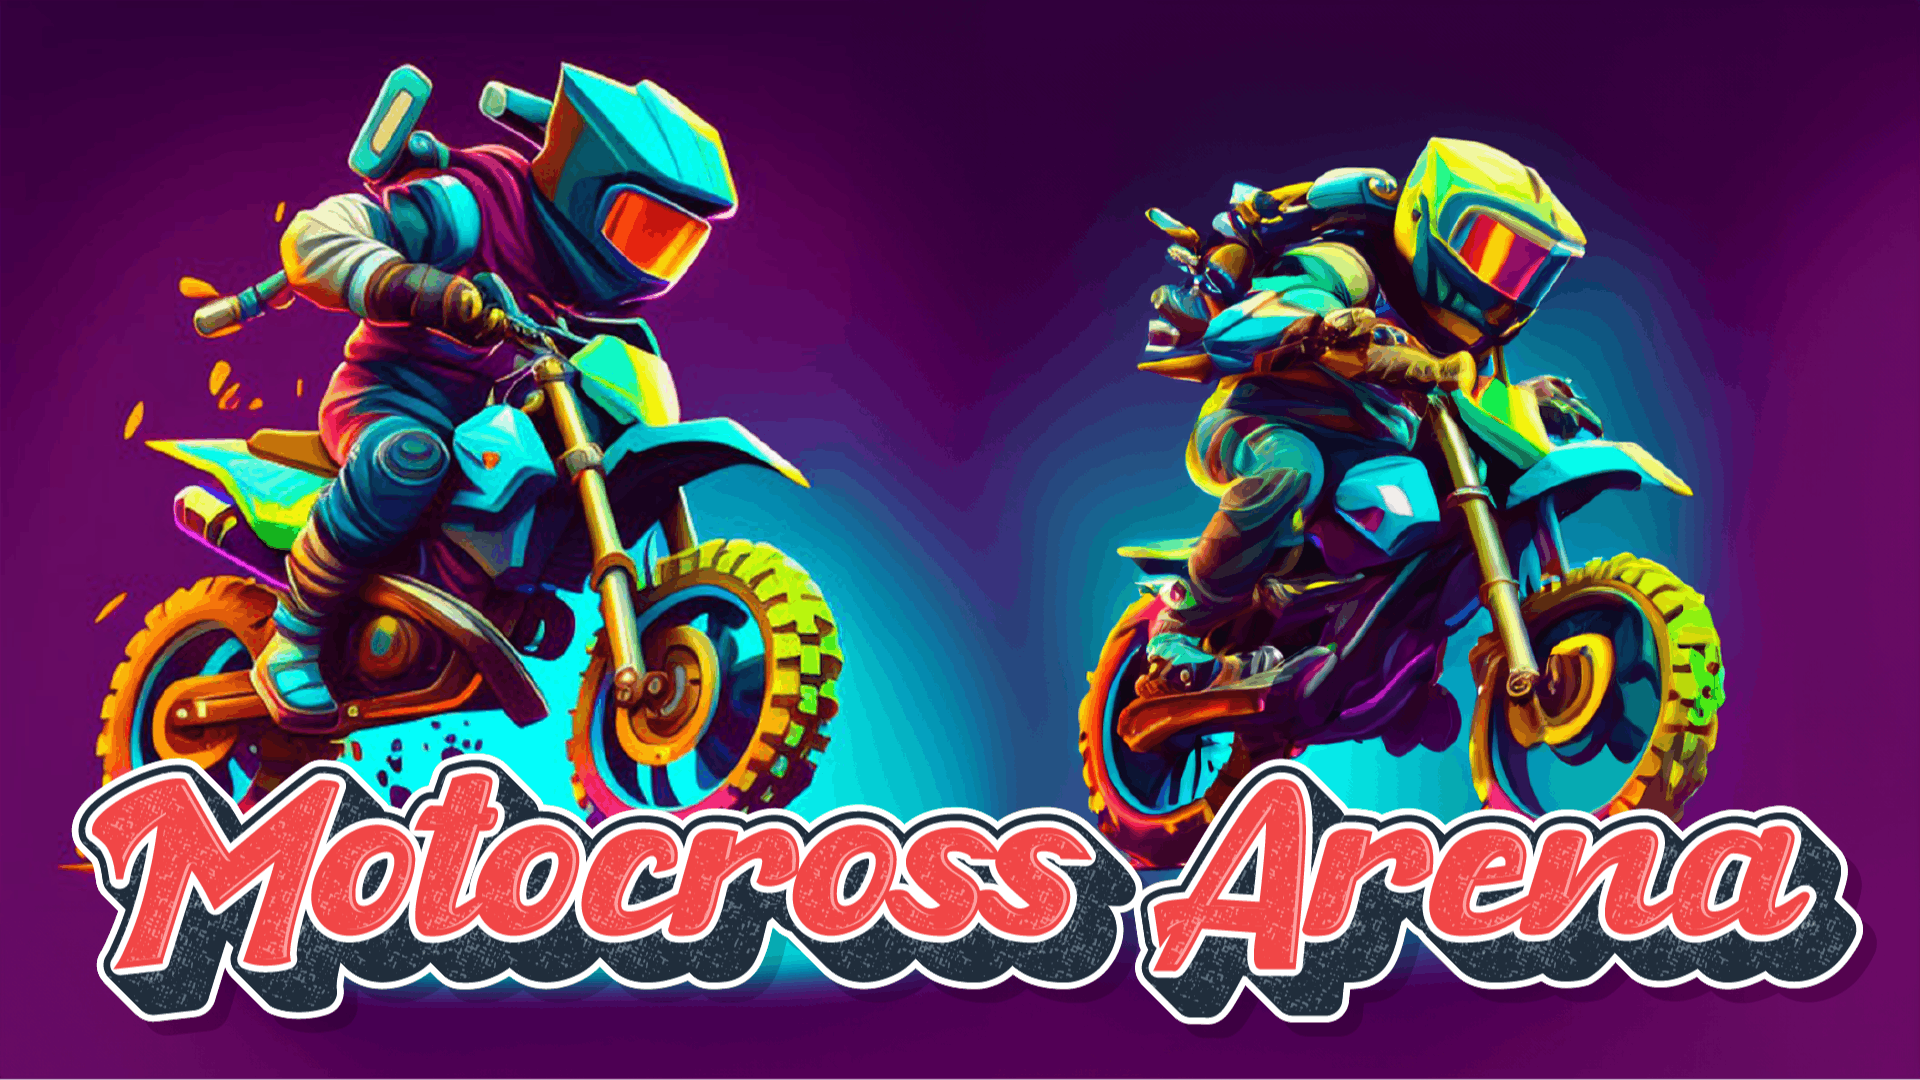 Play Moto Bike: Offroad Racing Online for Free on PC & Mobile